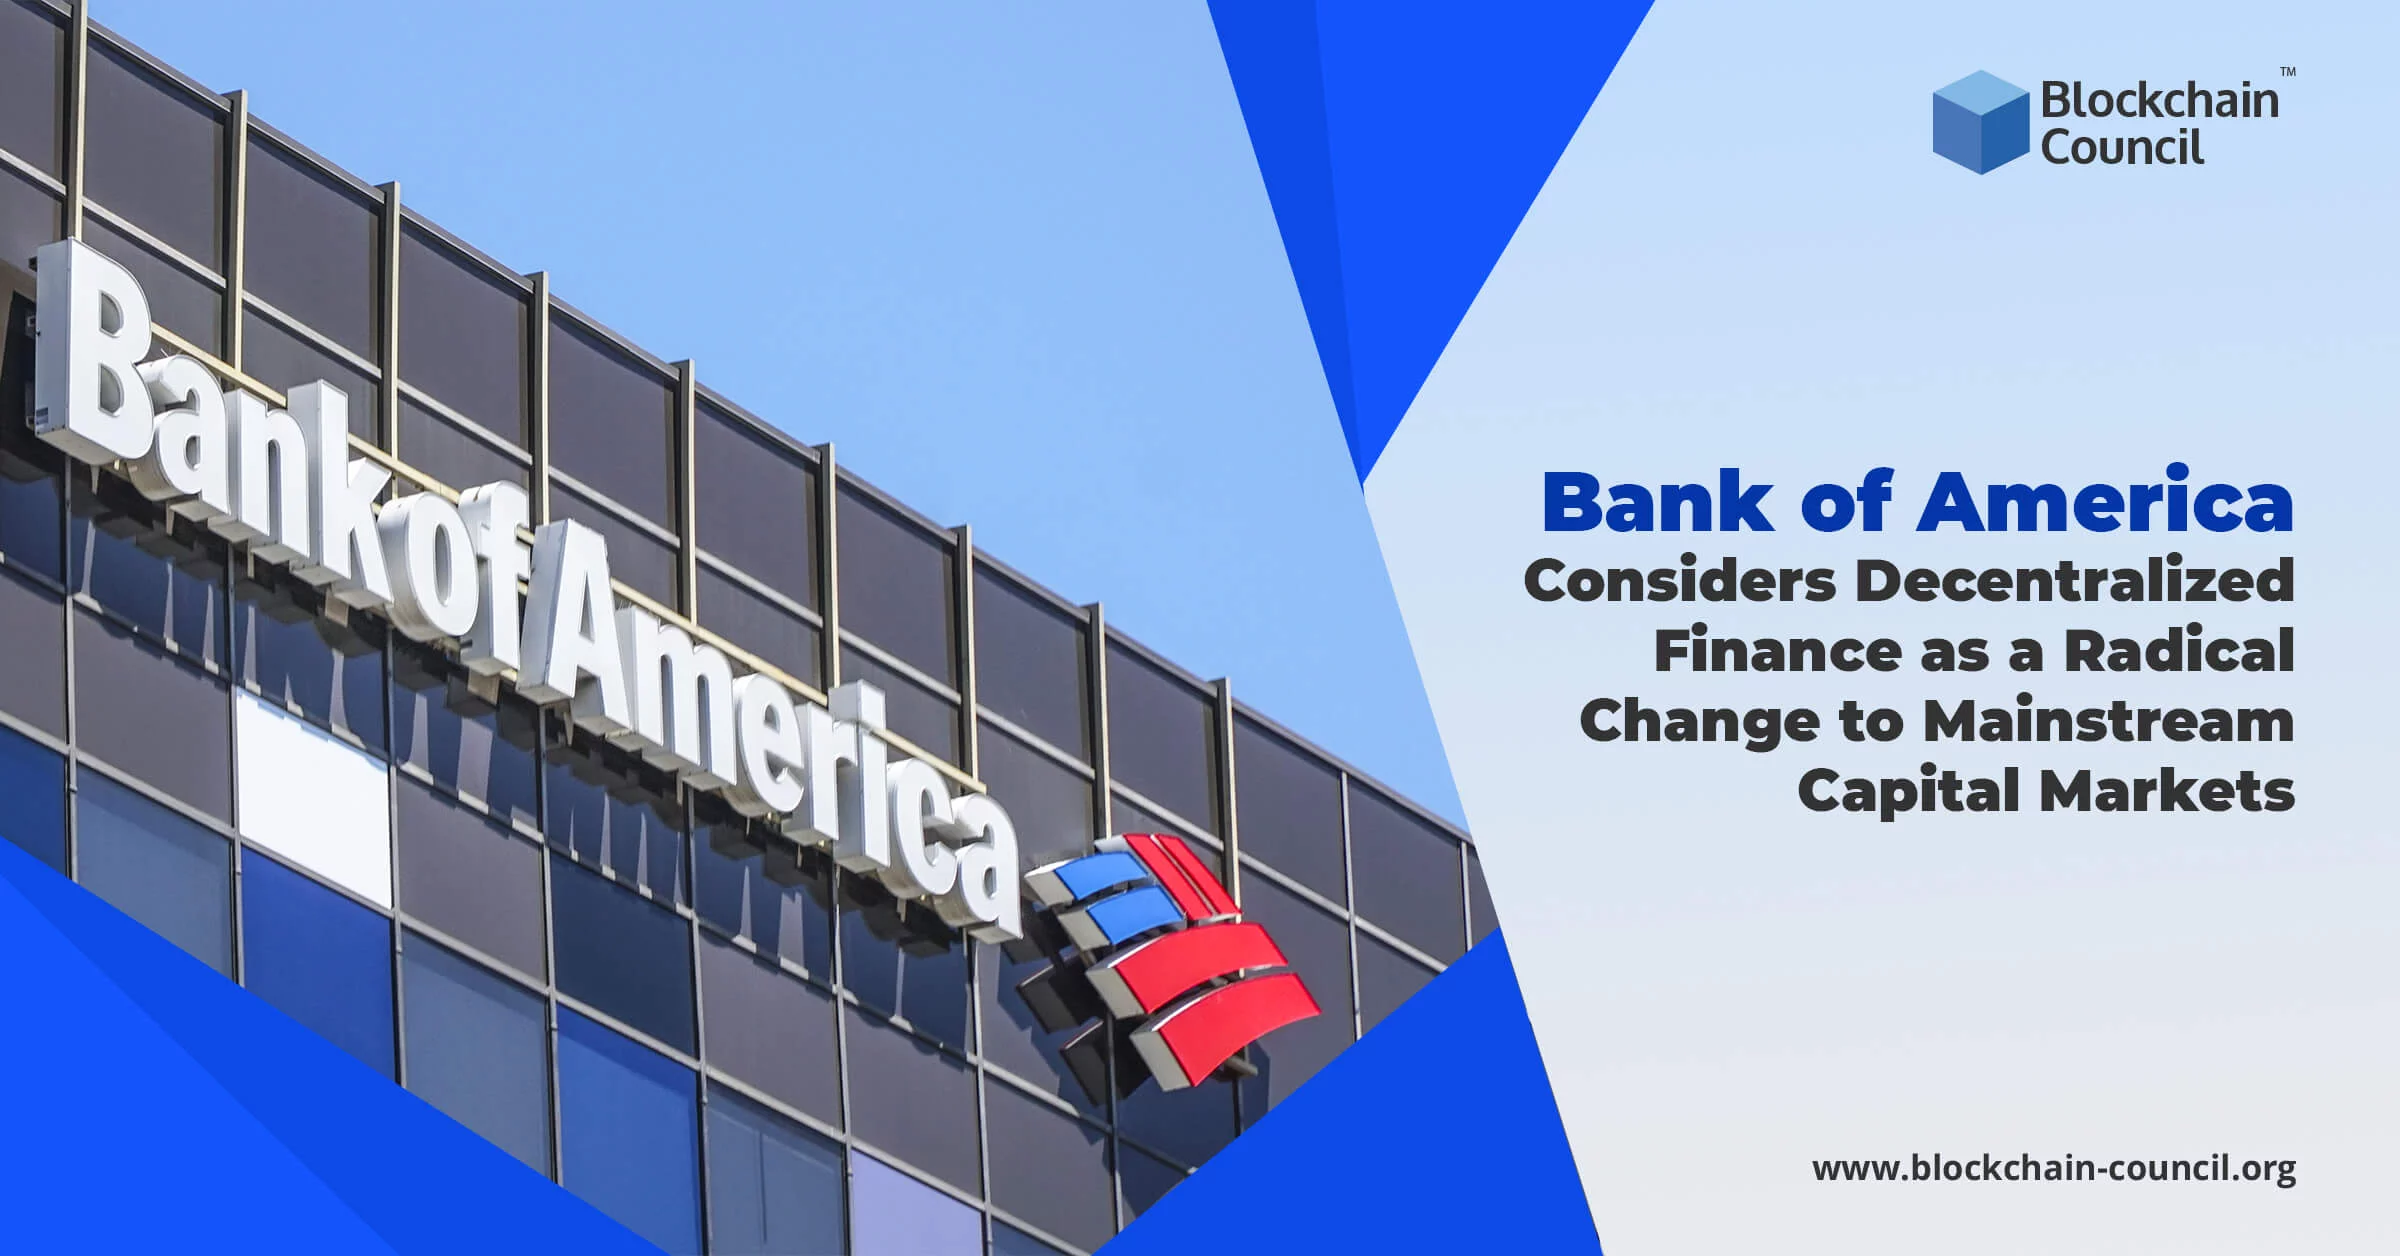 Bank of America Considers Decentralized Finance as a Radical Change to Mainstream Capital Markets